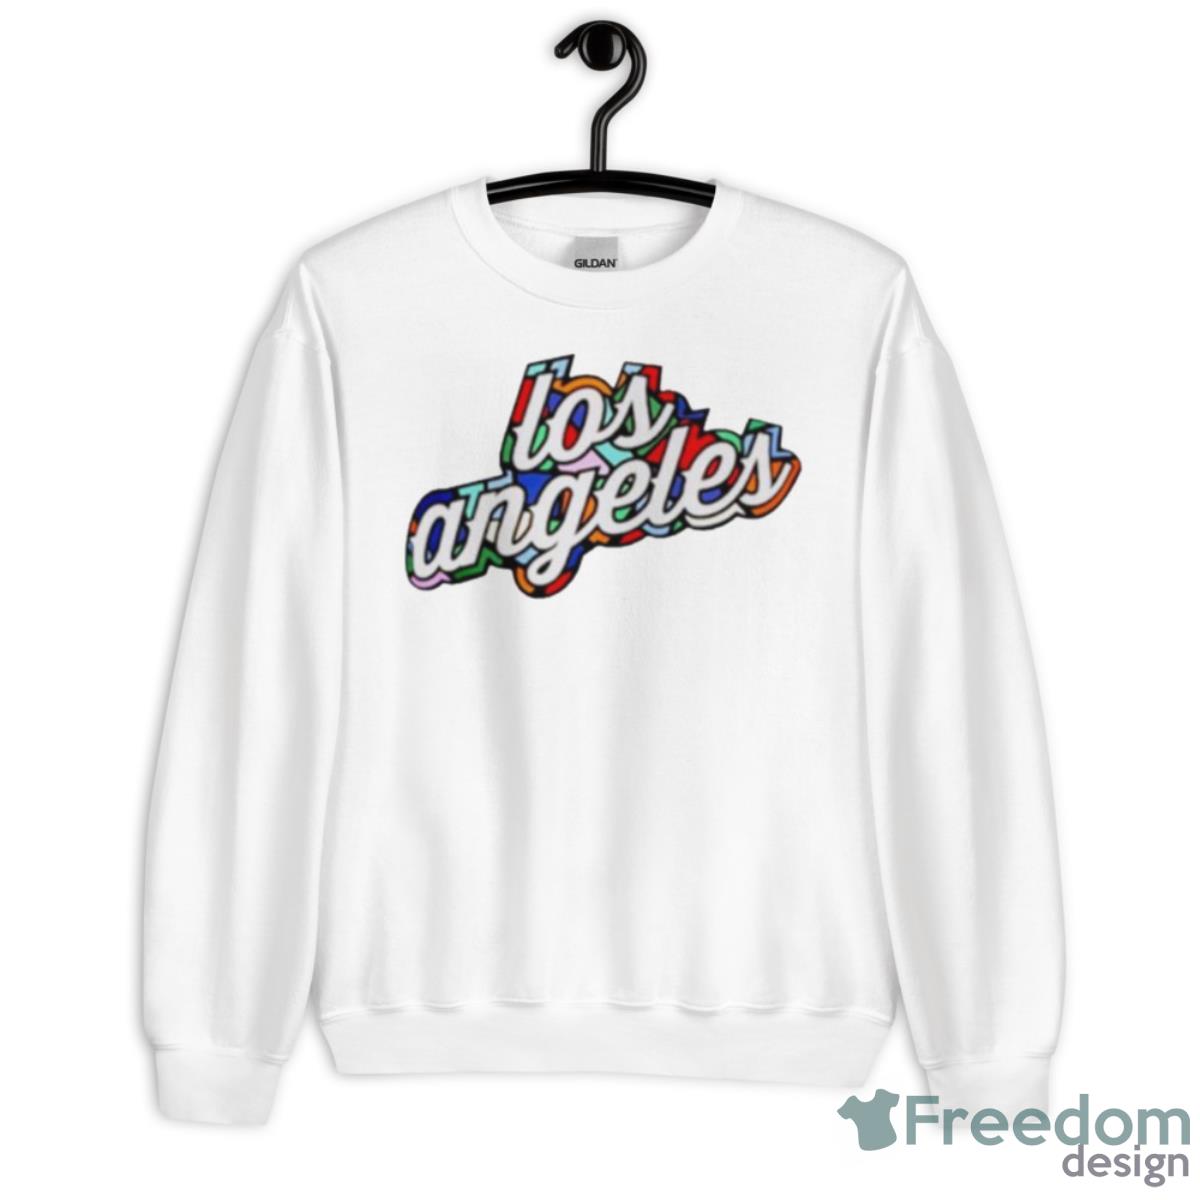 Los Angeles Clippers City Edition Logo T Shirt